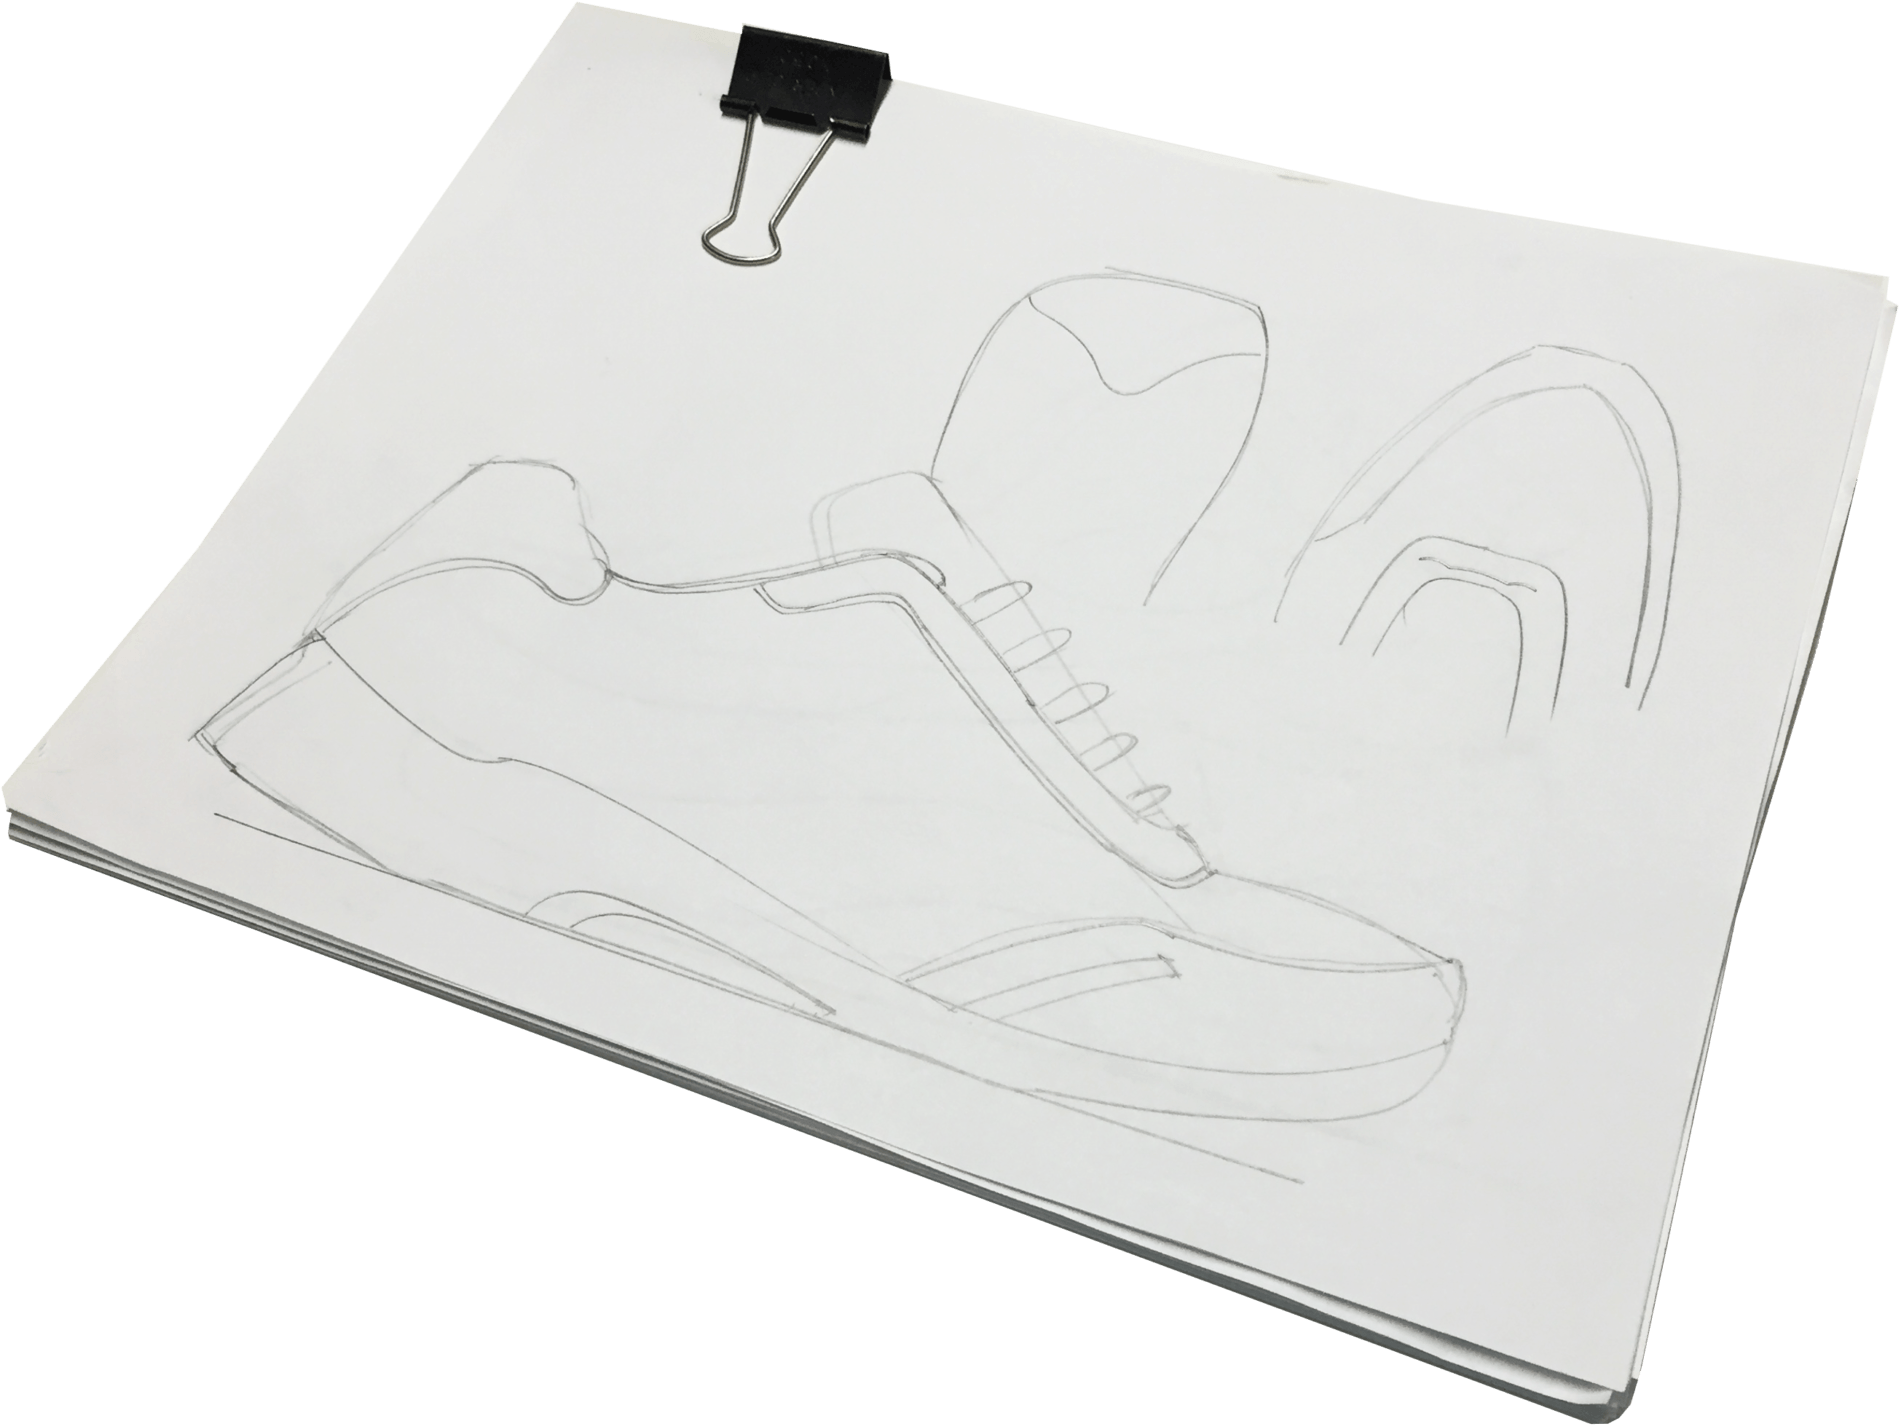 How To Draw Shoes - Sketch (2048x1554)